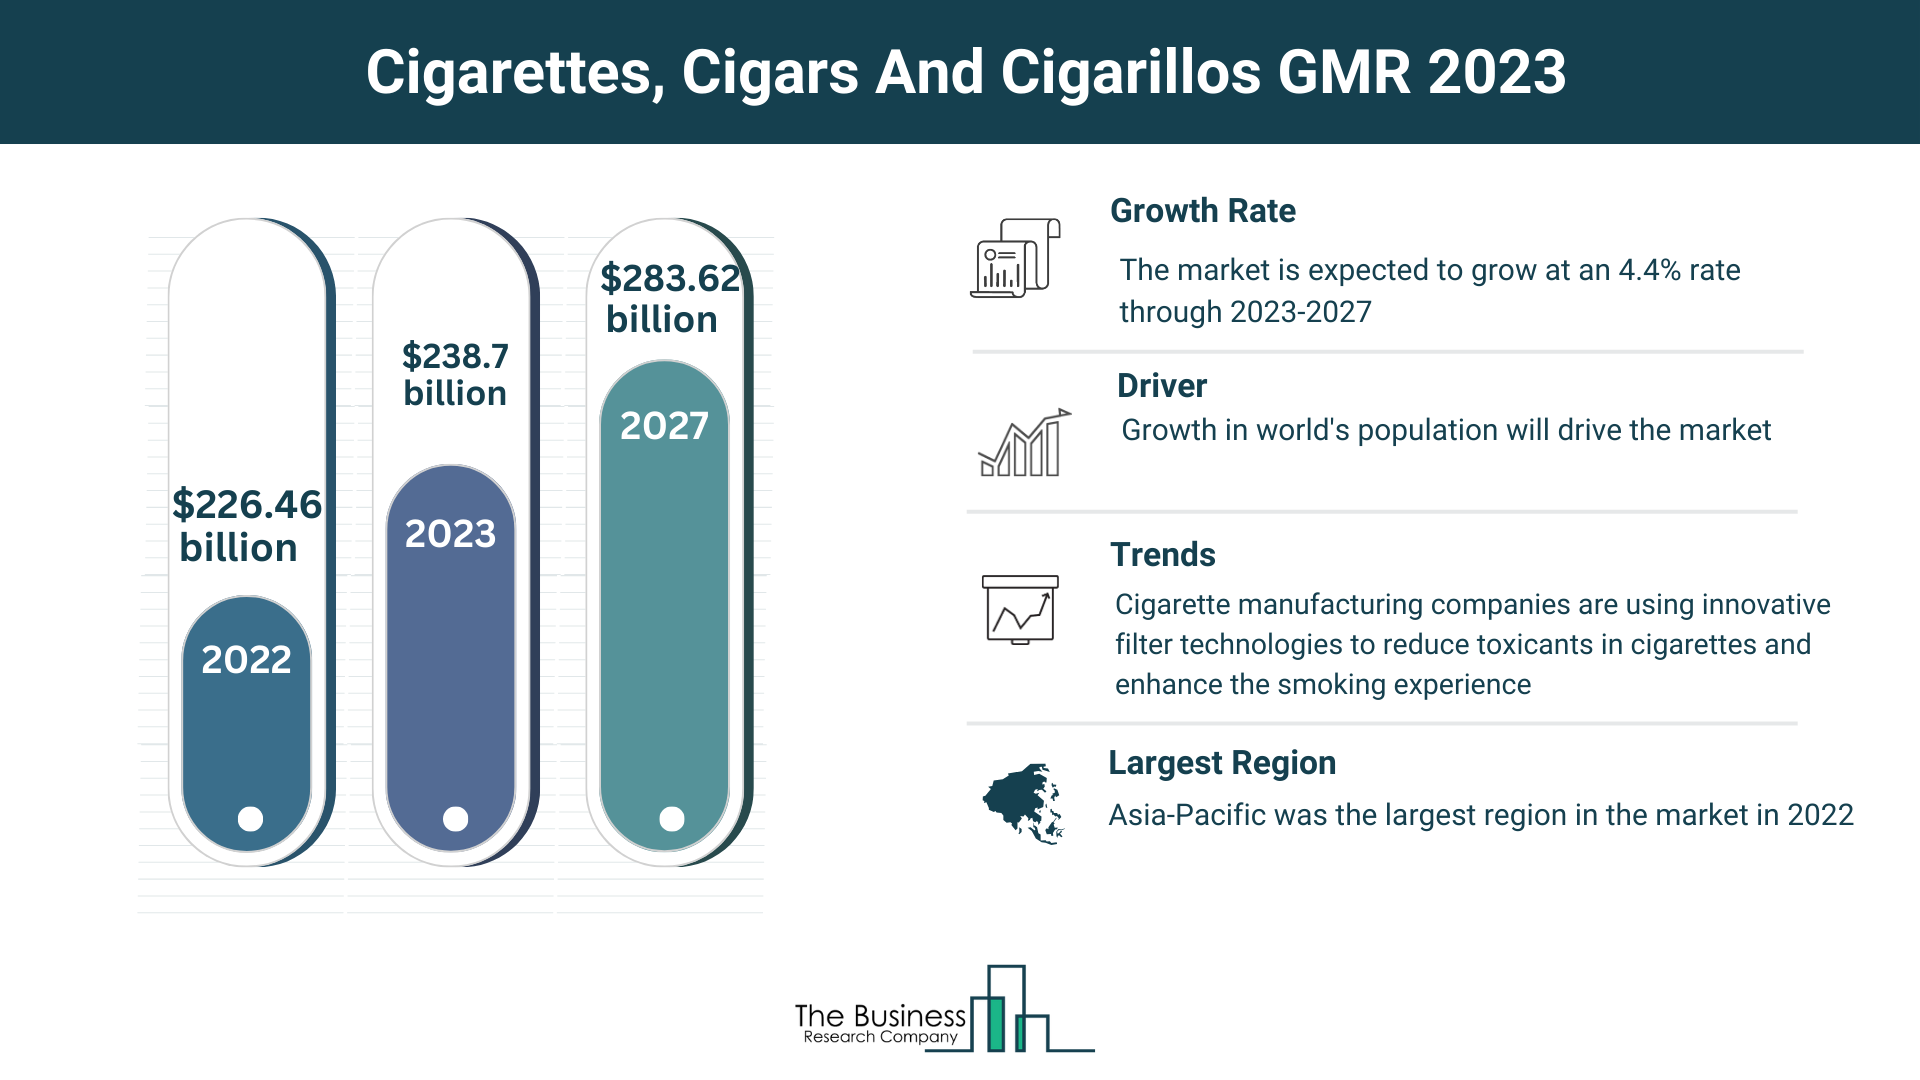 Cigarettes, Cigars And Cigarillos Market Overview: Market Size, Major Drivers And Trends